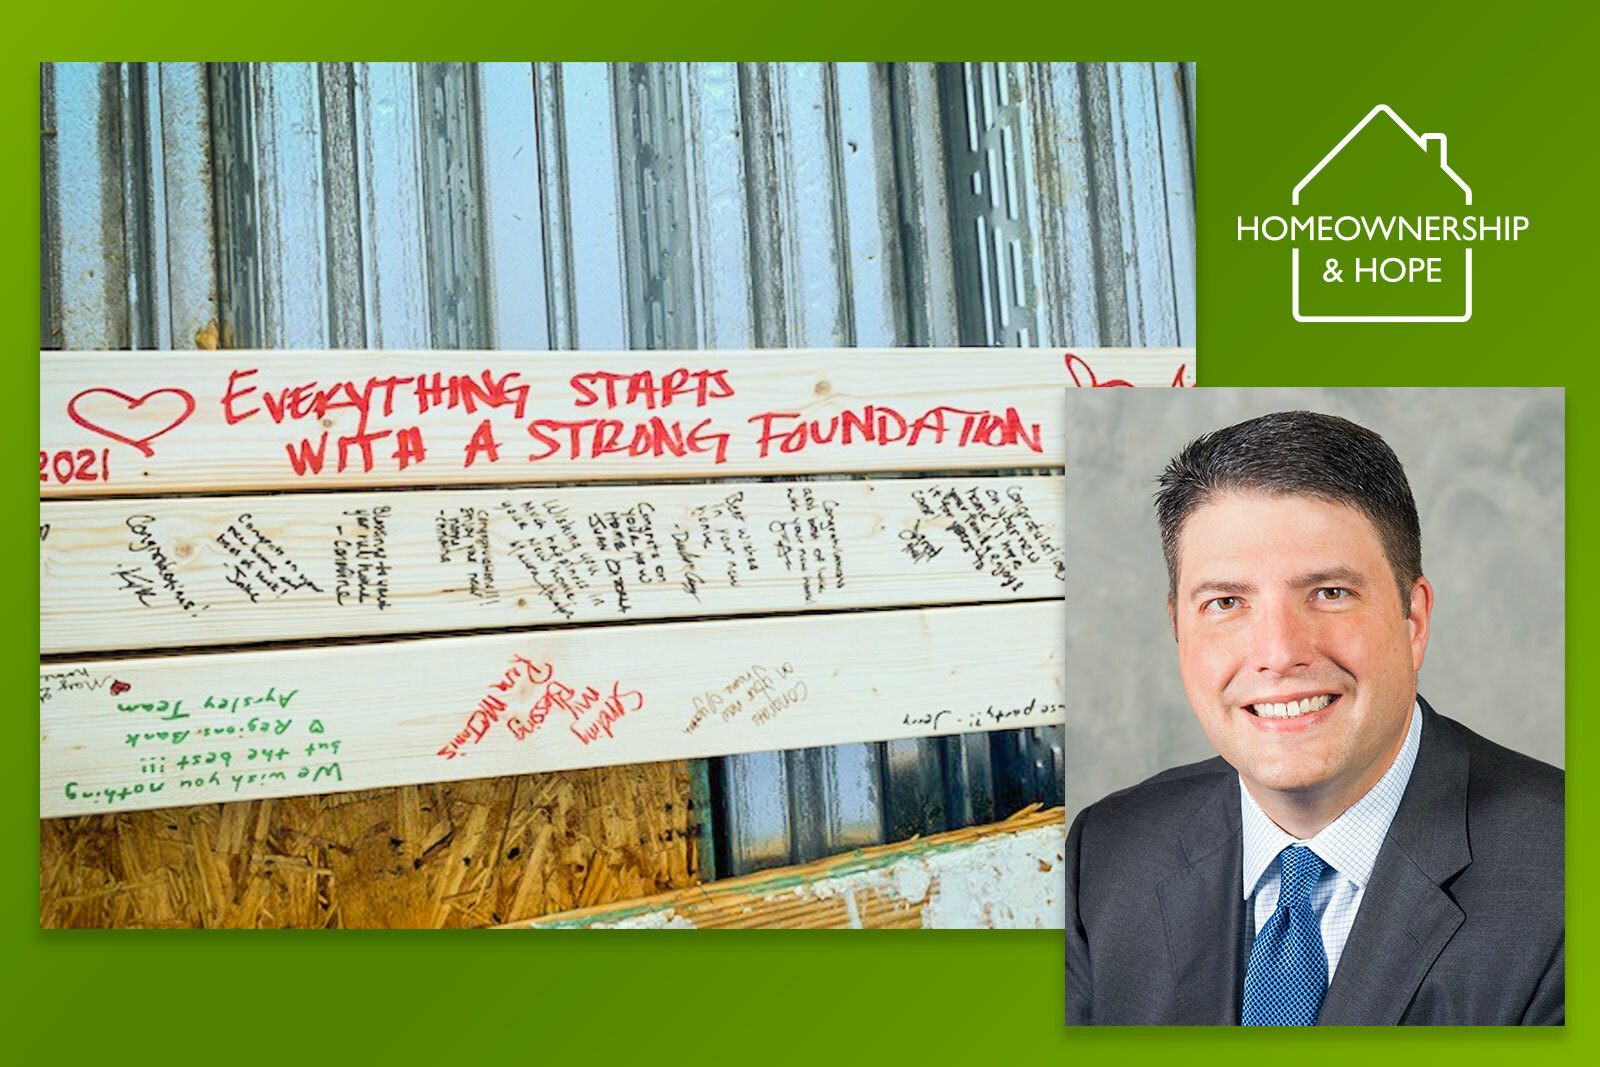 a collage of wooden planks with handwritten messages, a logo, and a businessman